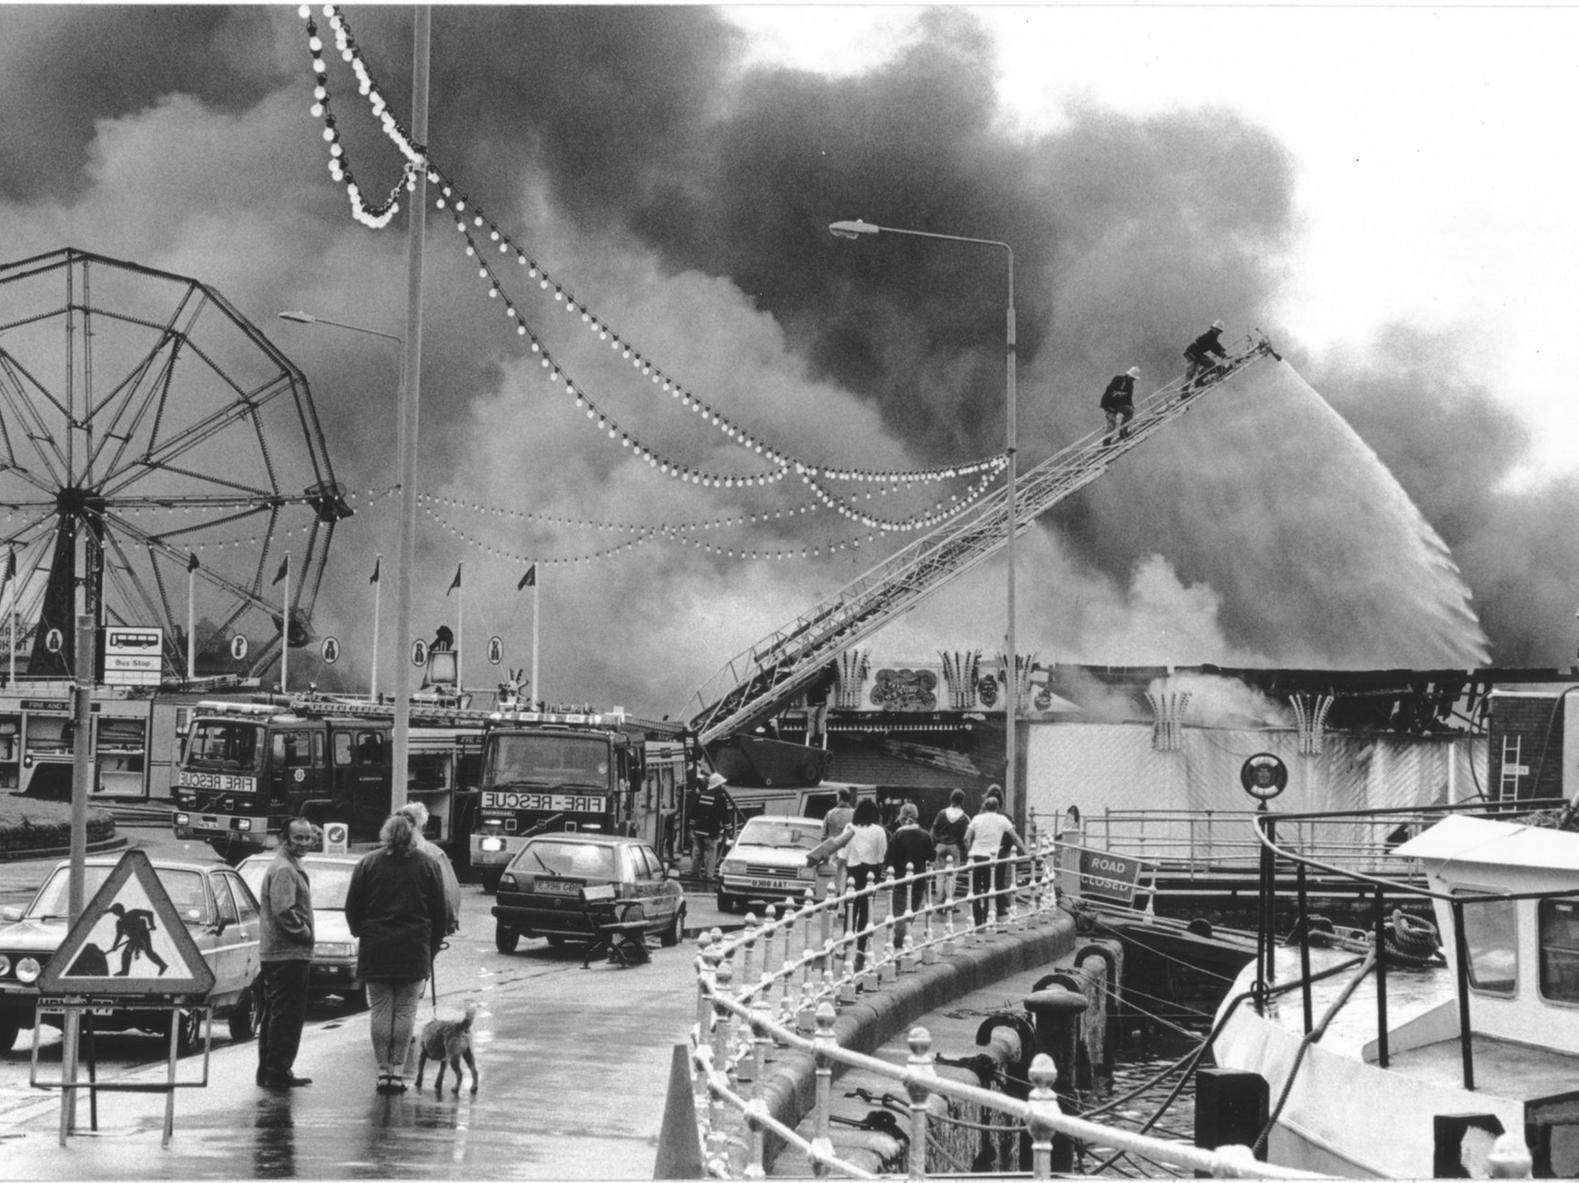 There were dramatic scenes on Sandside when a fire broke out at Luna Park in 1991.